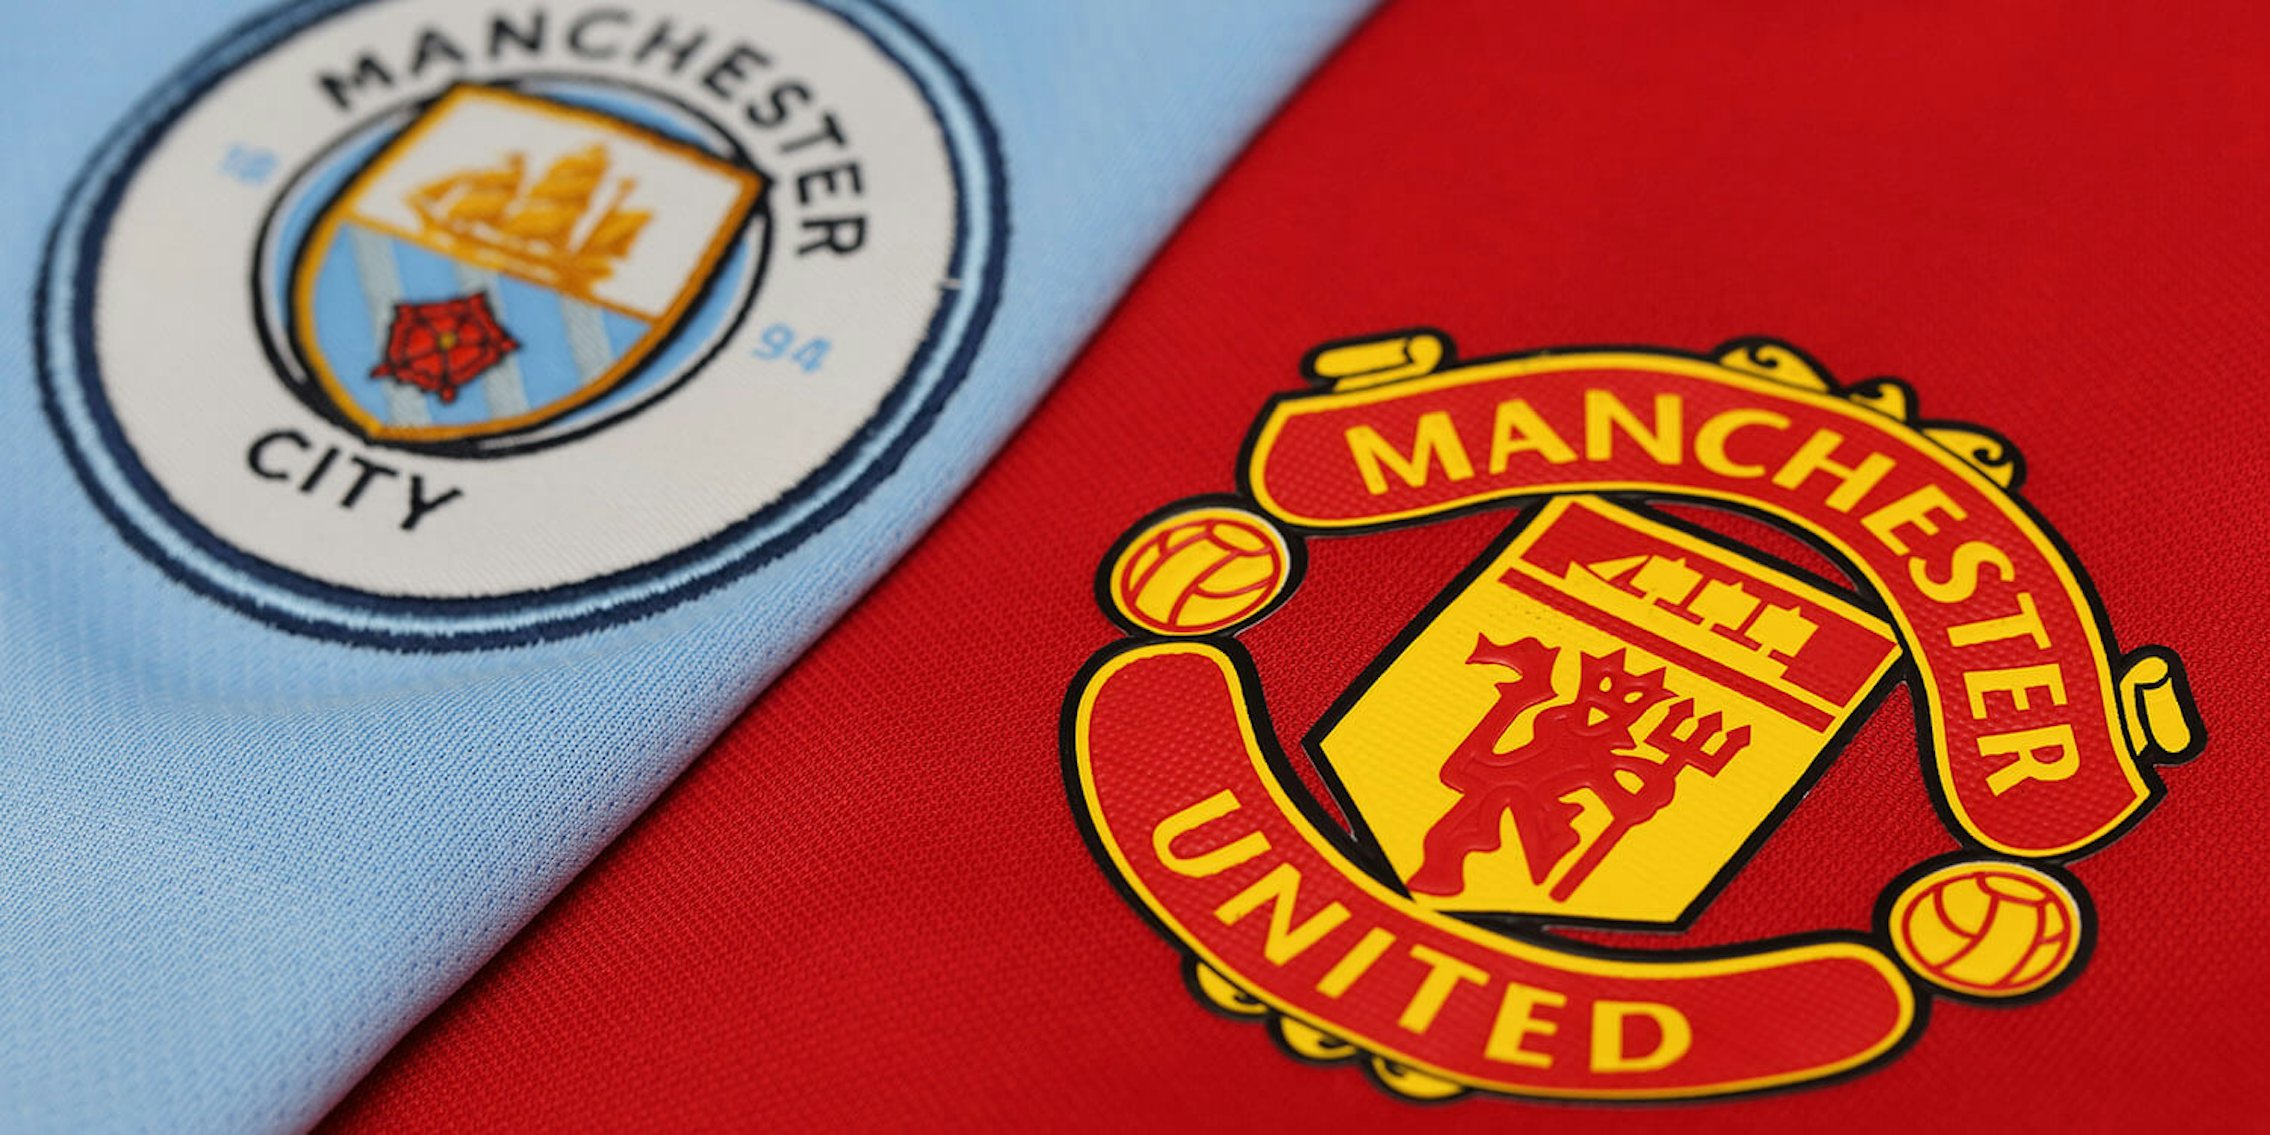 Manchester United and Manchester City logos